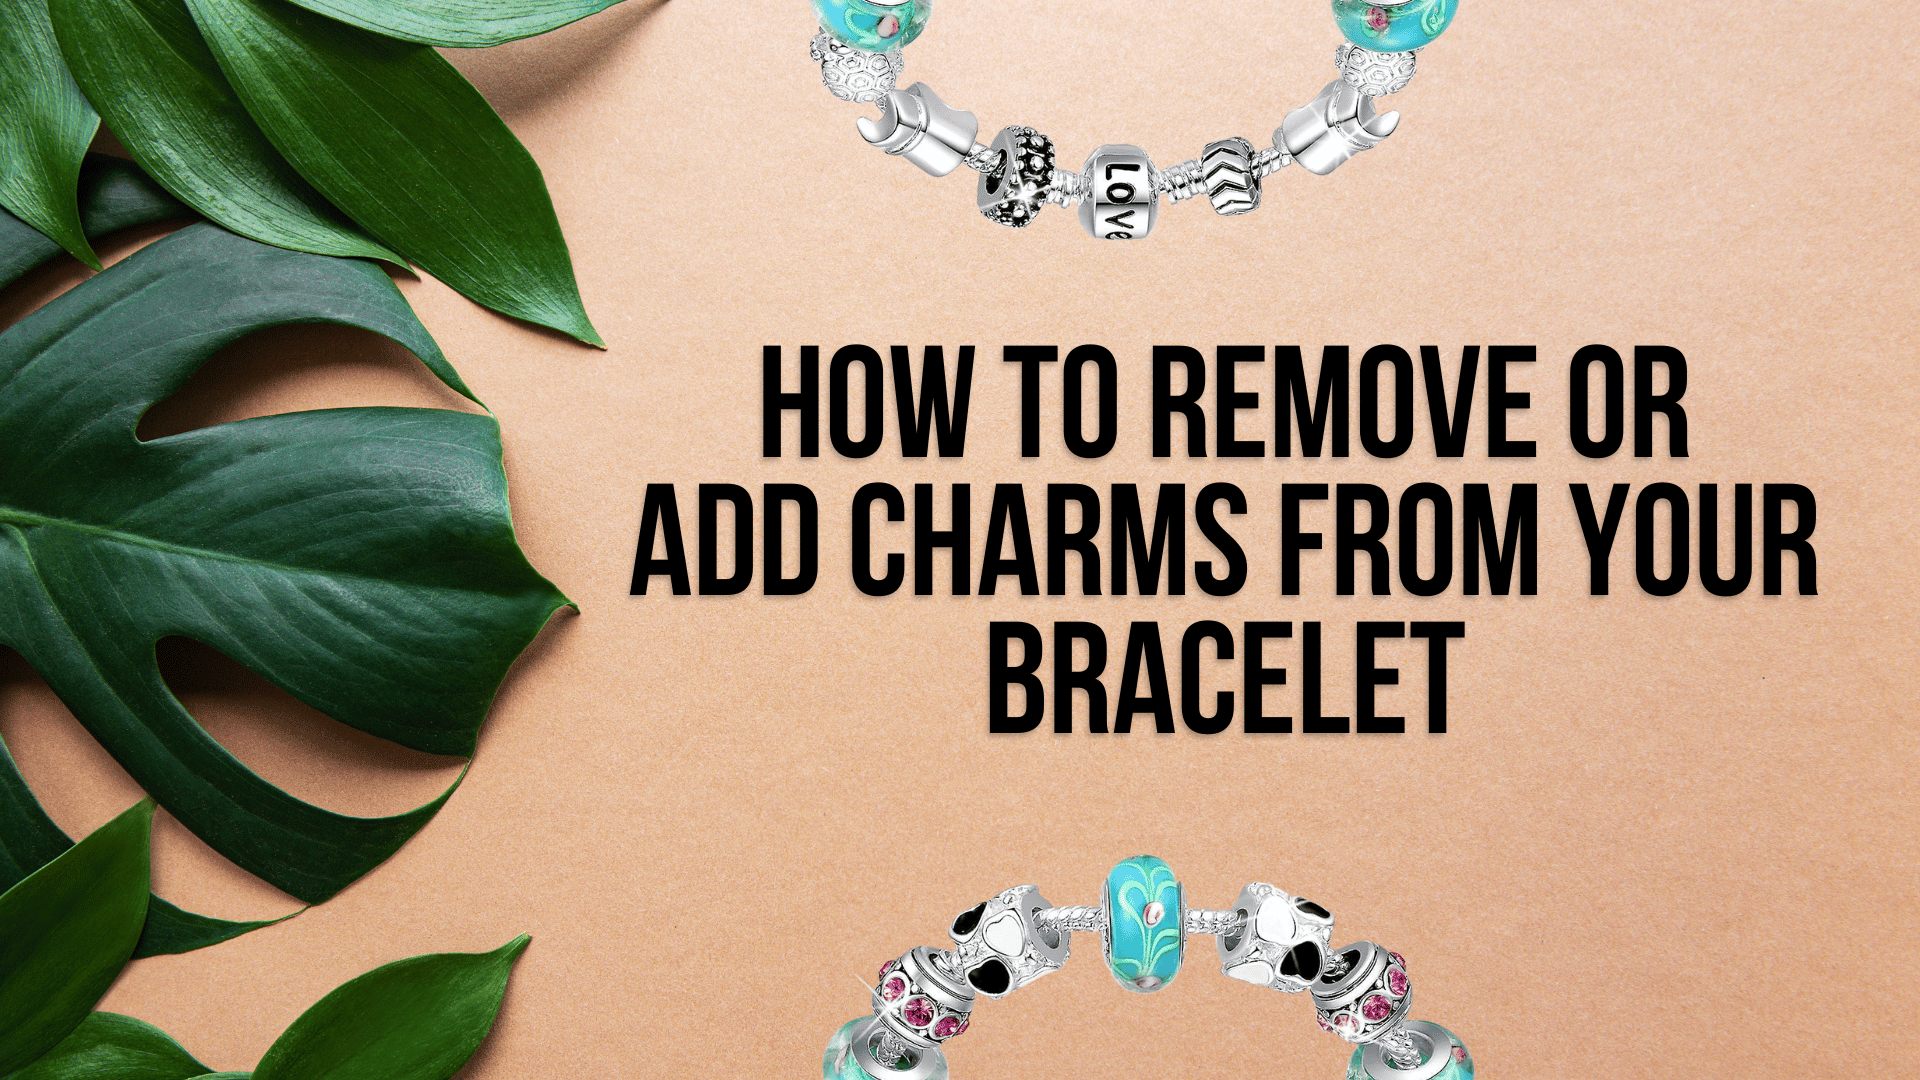 How to Remove or Add Charms from Your Bracelet